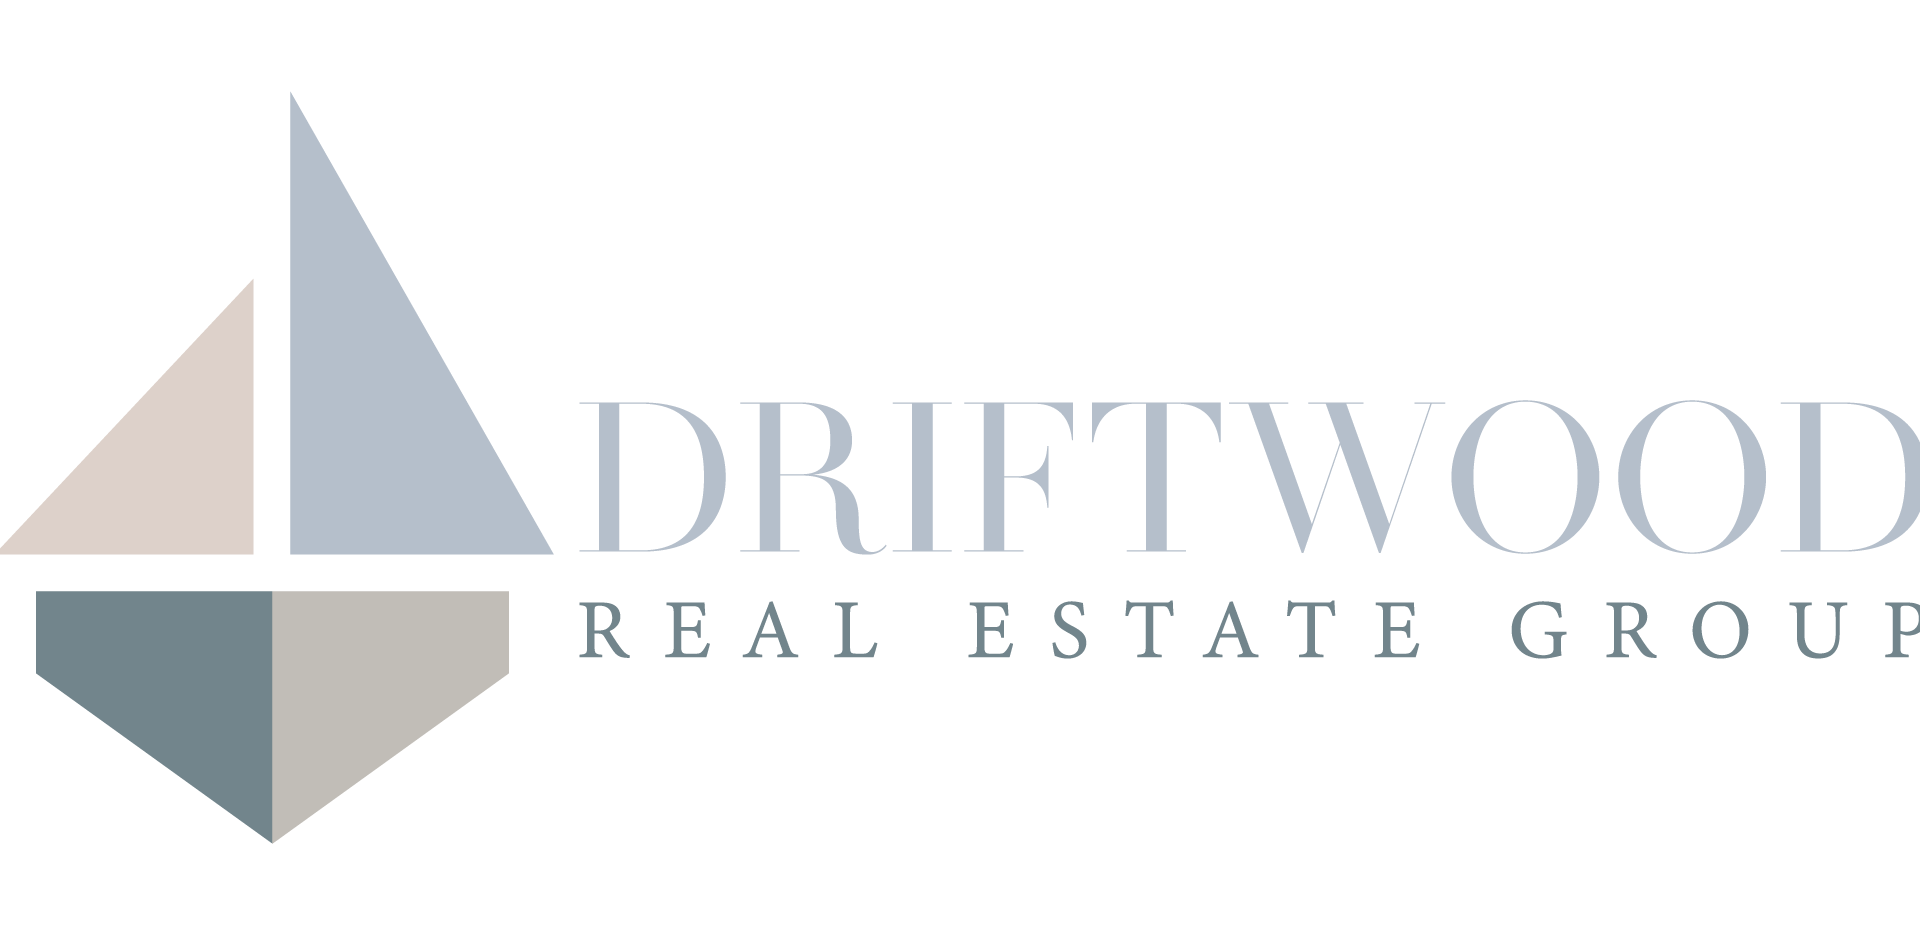 Driftwood Real Estate Group